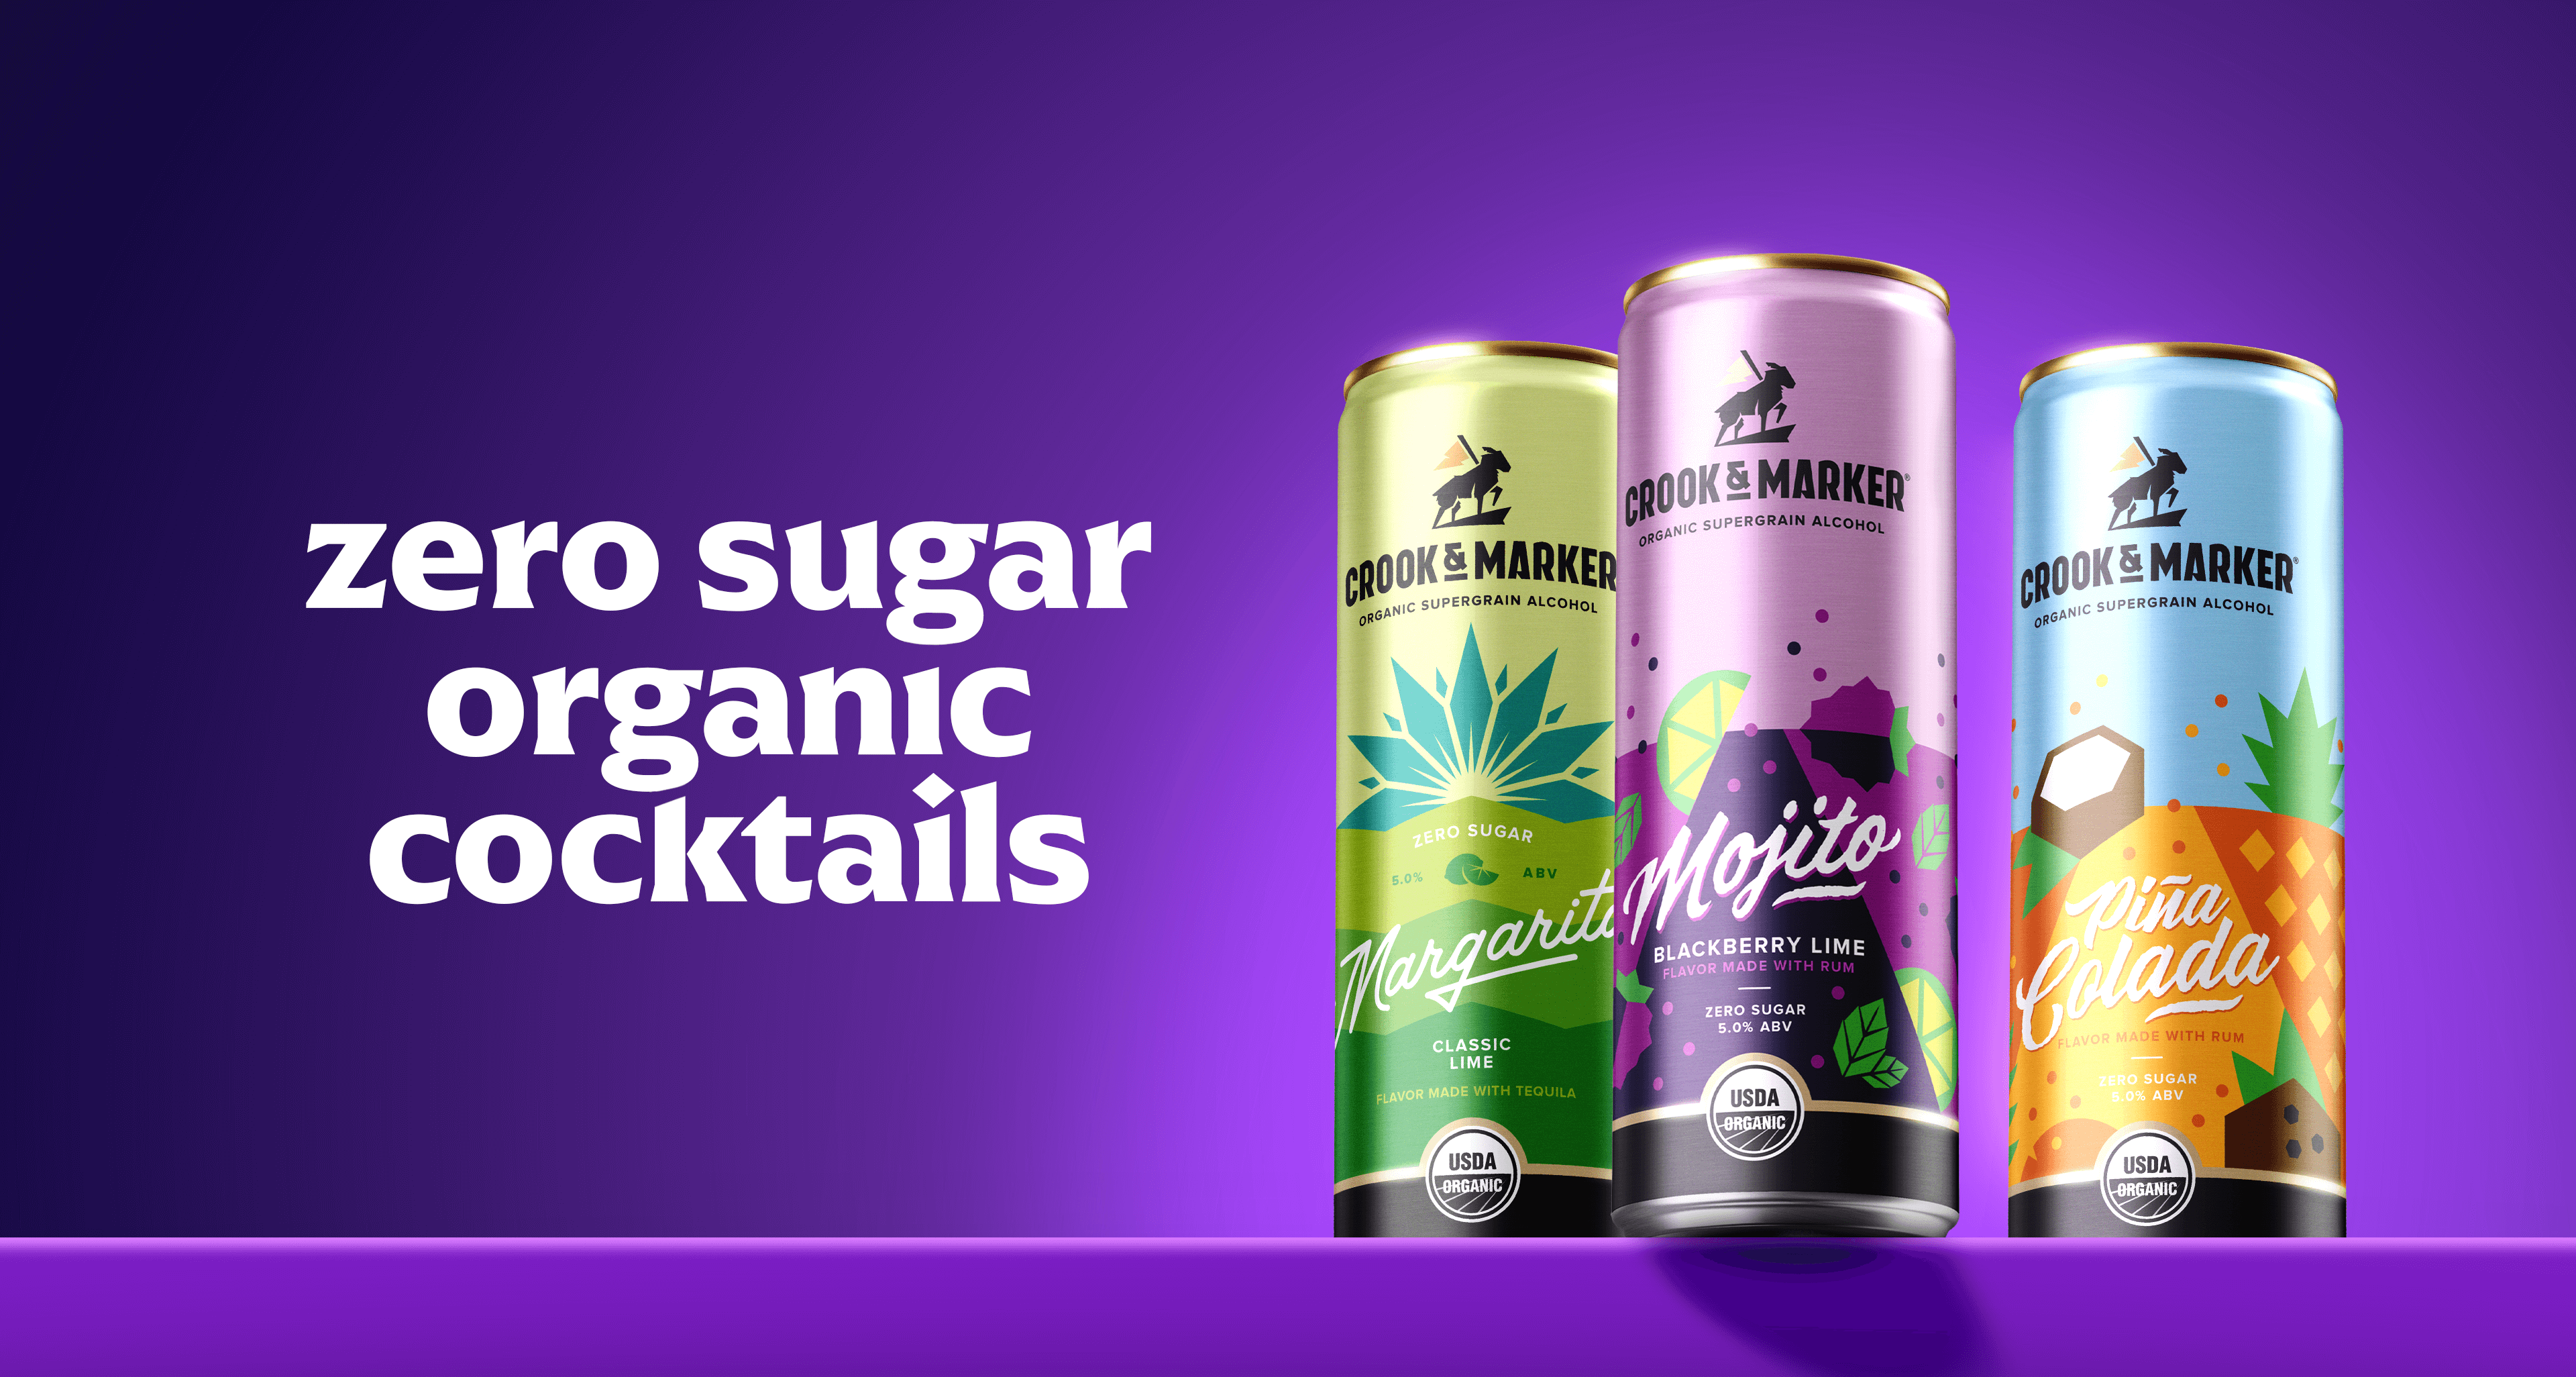 zero sugar organic cocktails from crook and marker